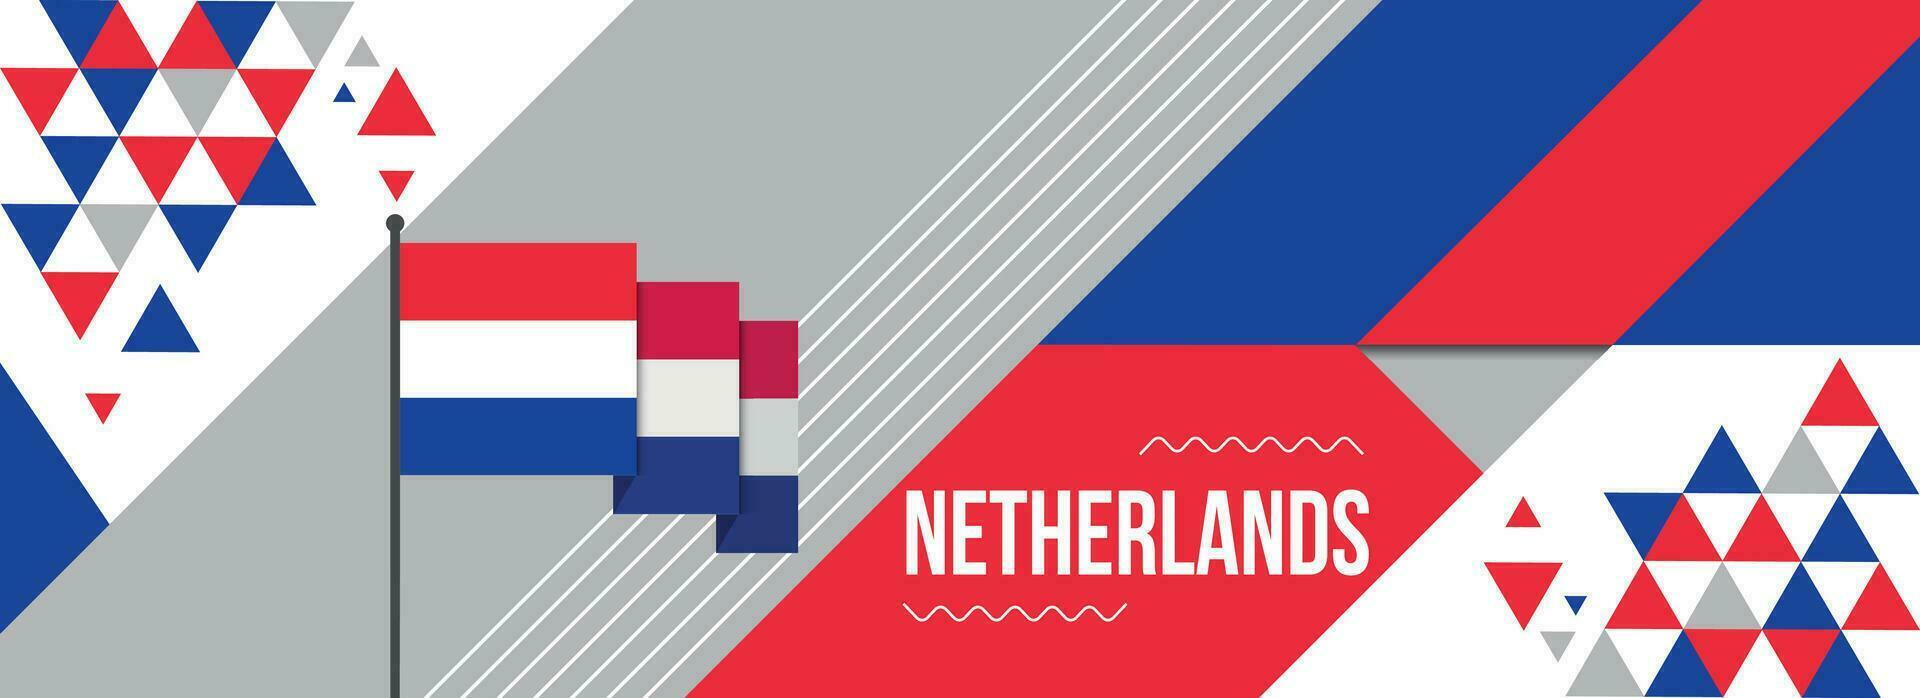 Netherlands national or independence day banner design for country celebration. Flag of Nederland with modern retro design and abstract geometric icons. Vector illustration.